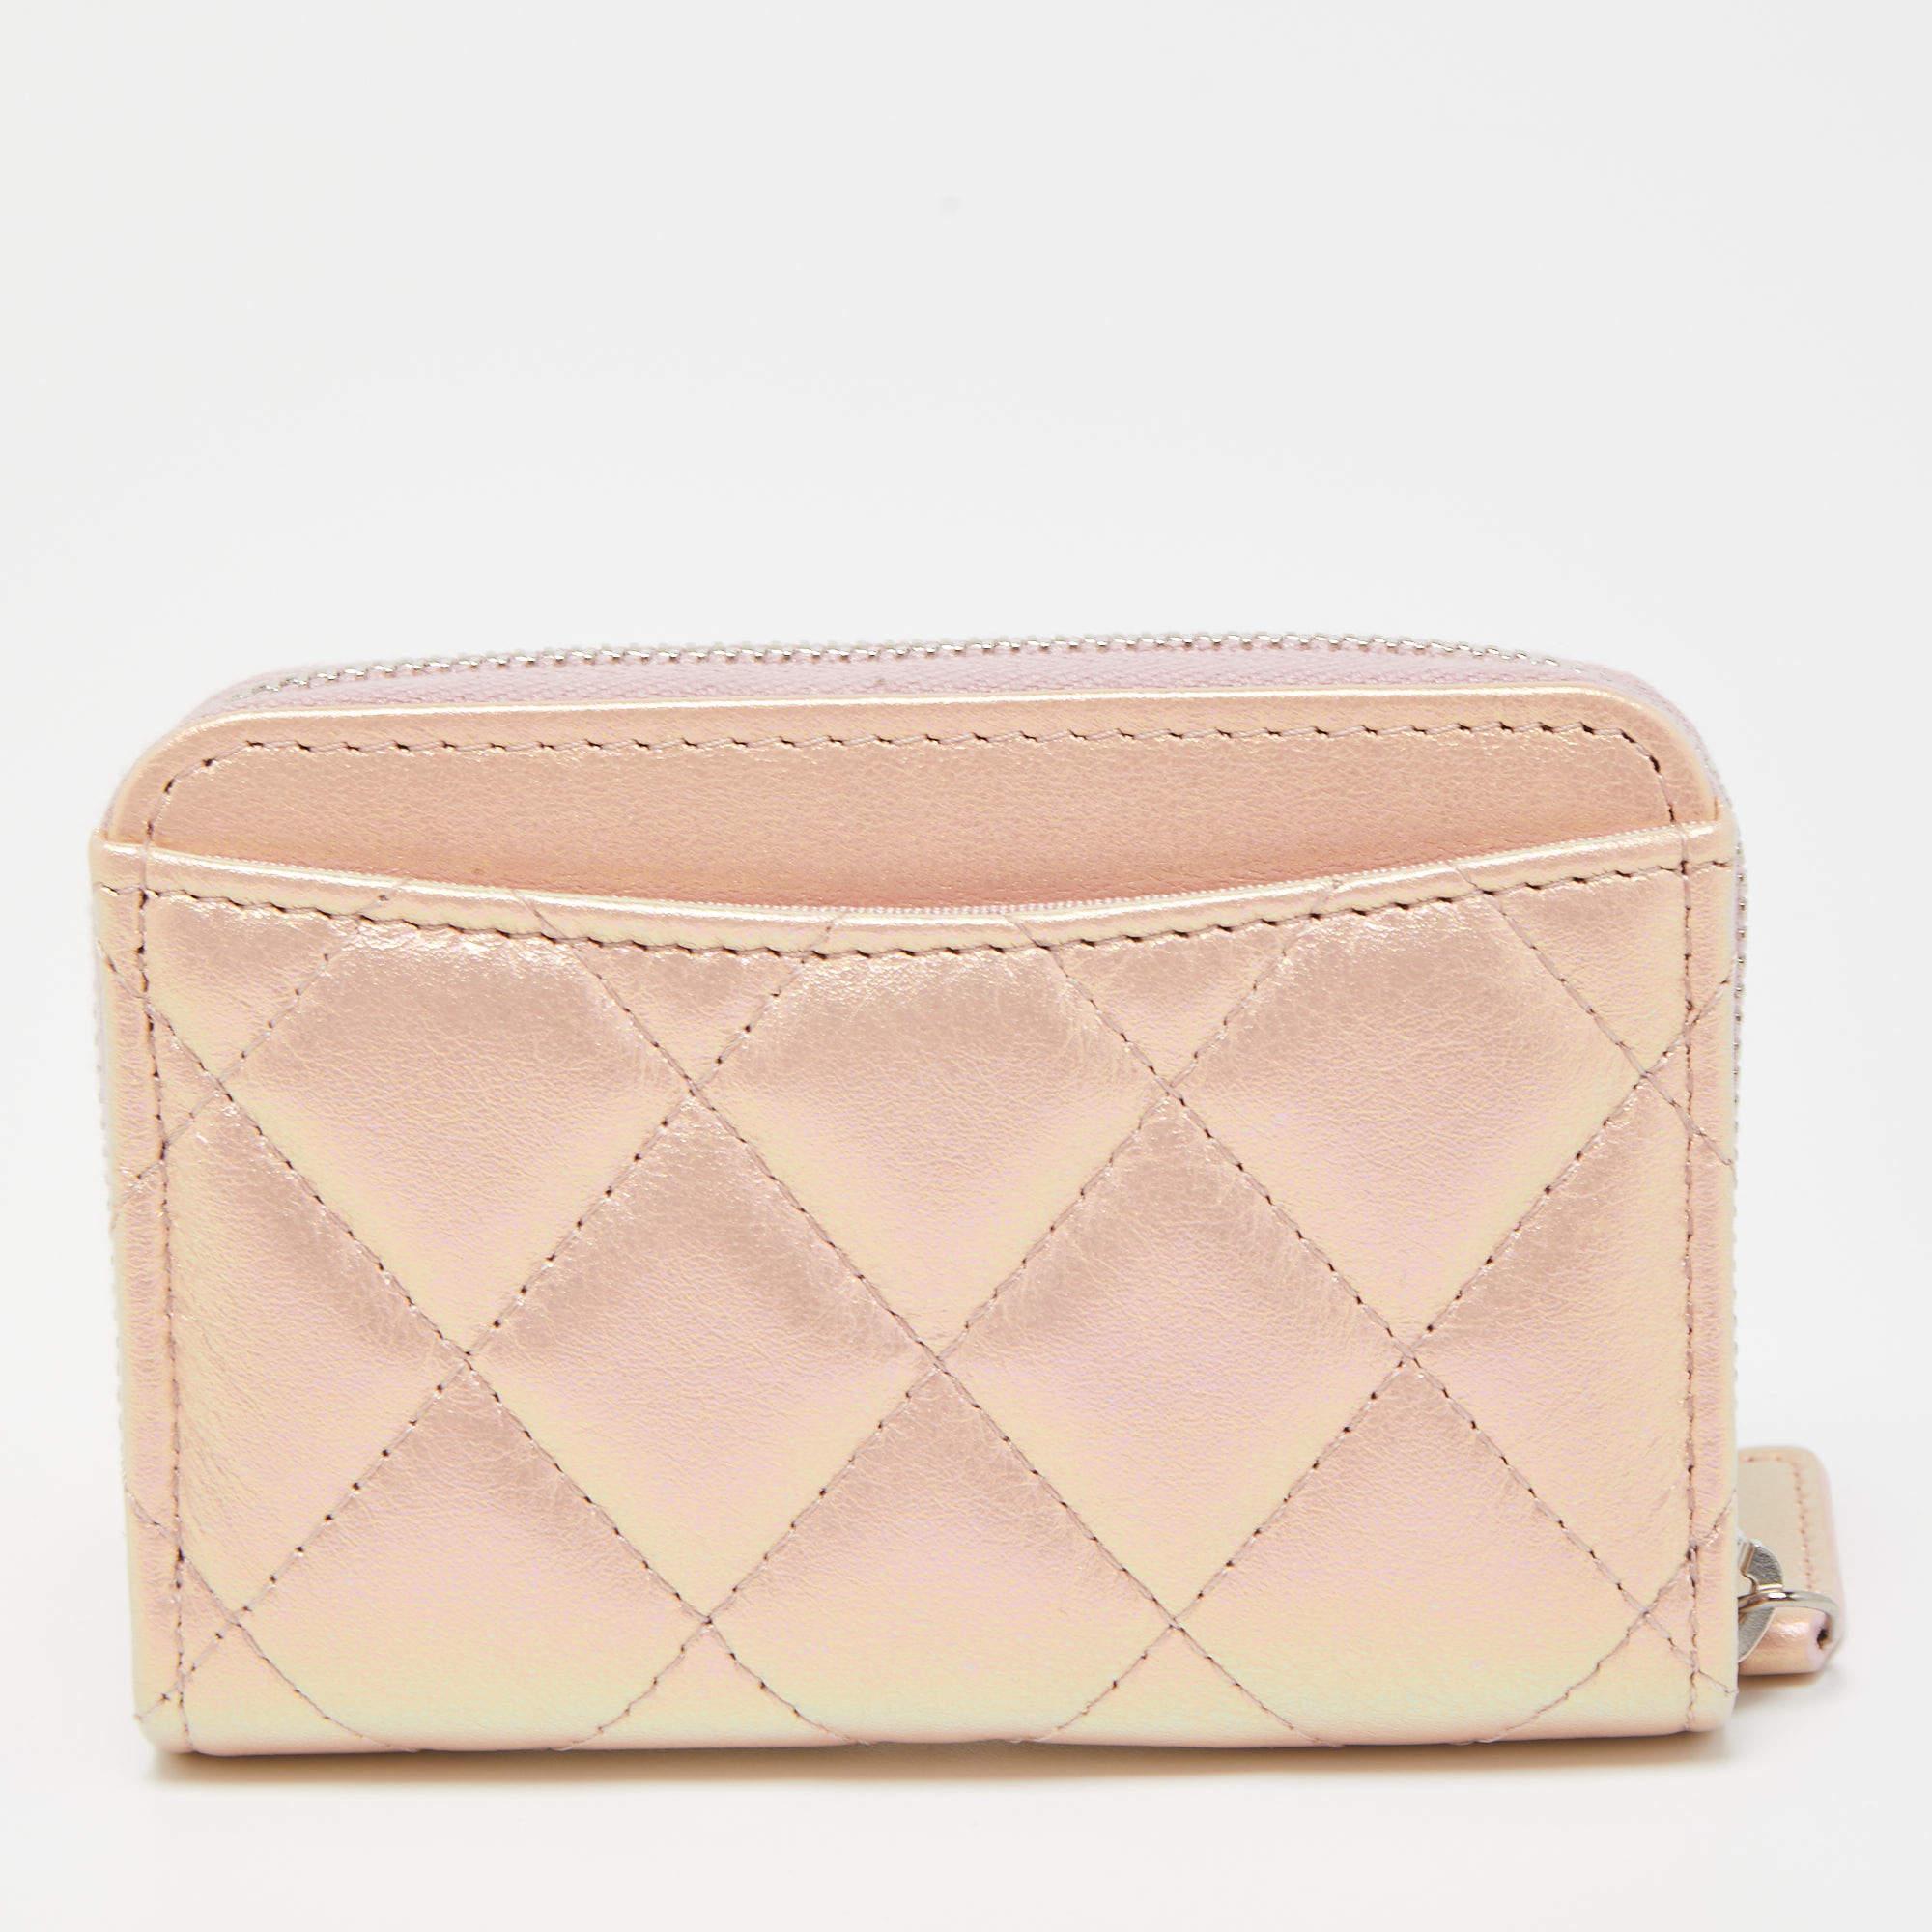 Chanel Pink Quilted Iridescent Leather CC Zip Coin Purse For Sale 3